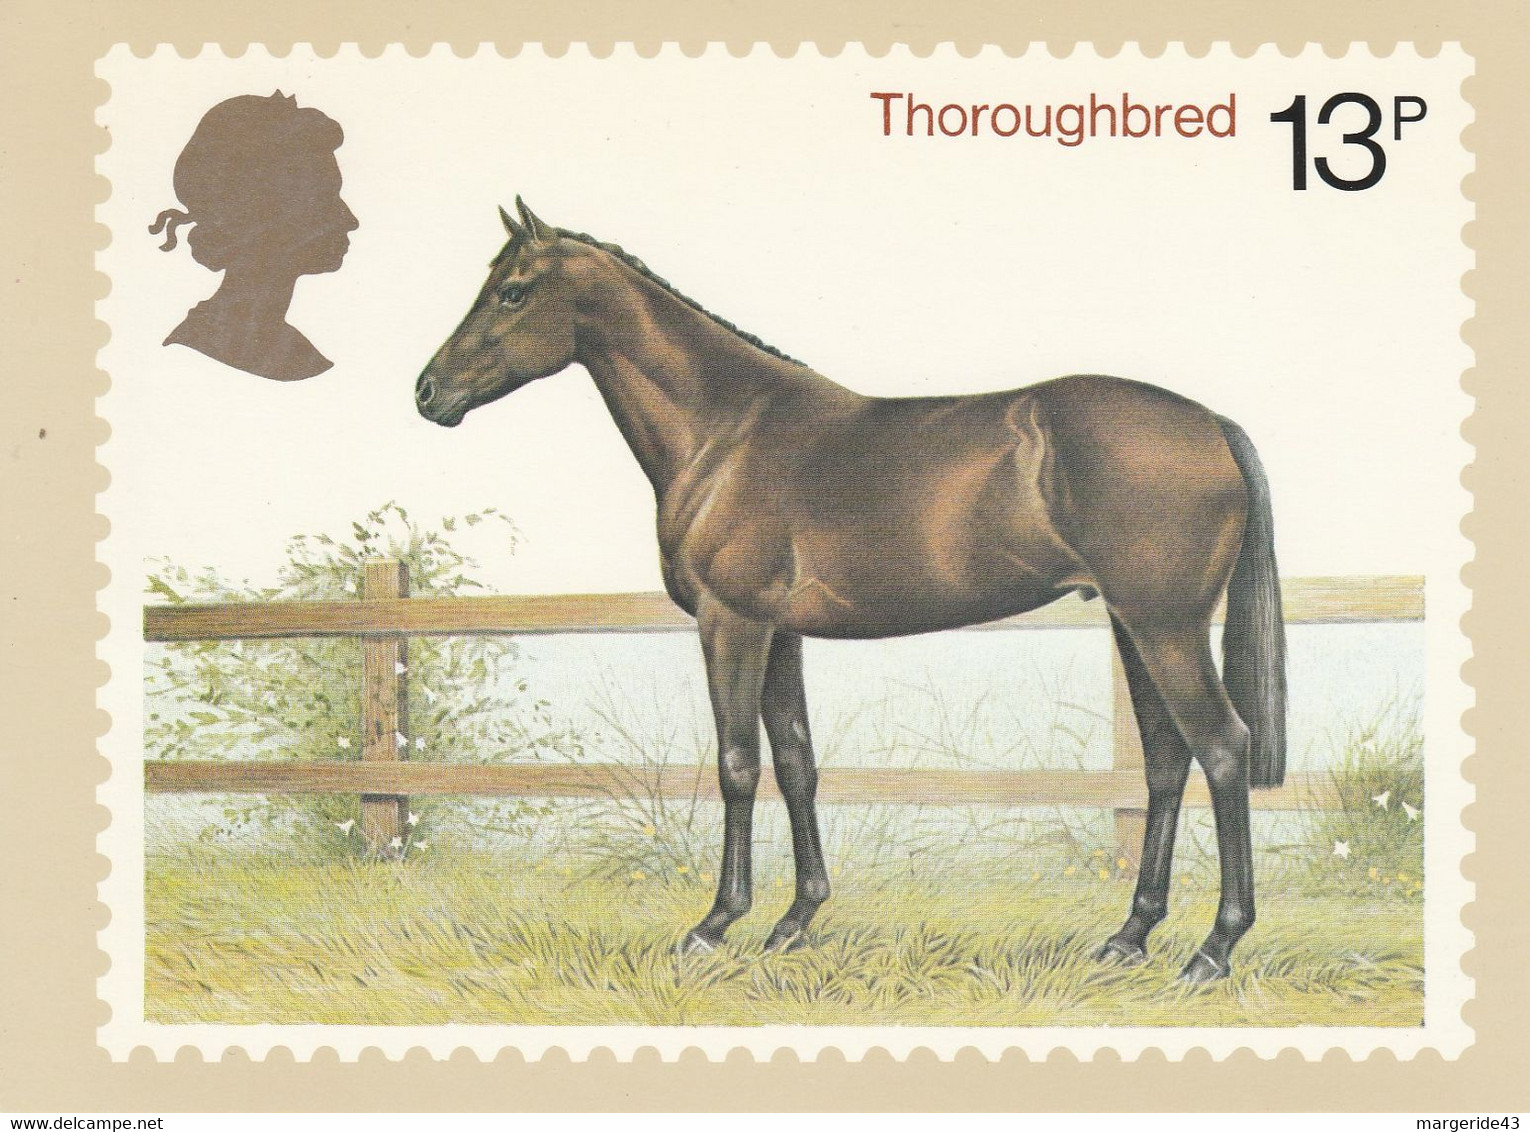 GB TIMBRE CHEVAL THOROUGHBRED 13 P - Stamps (pictures)